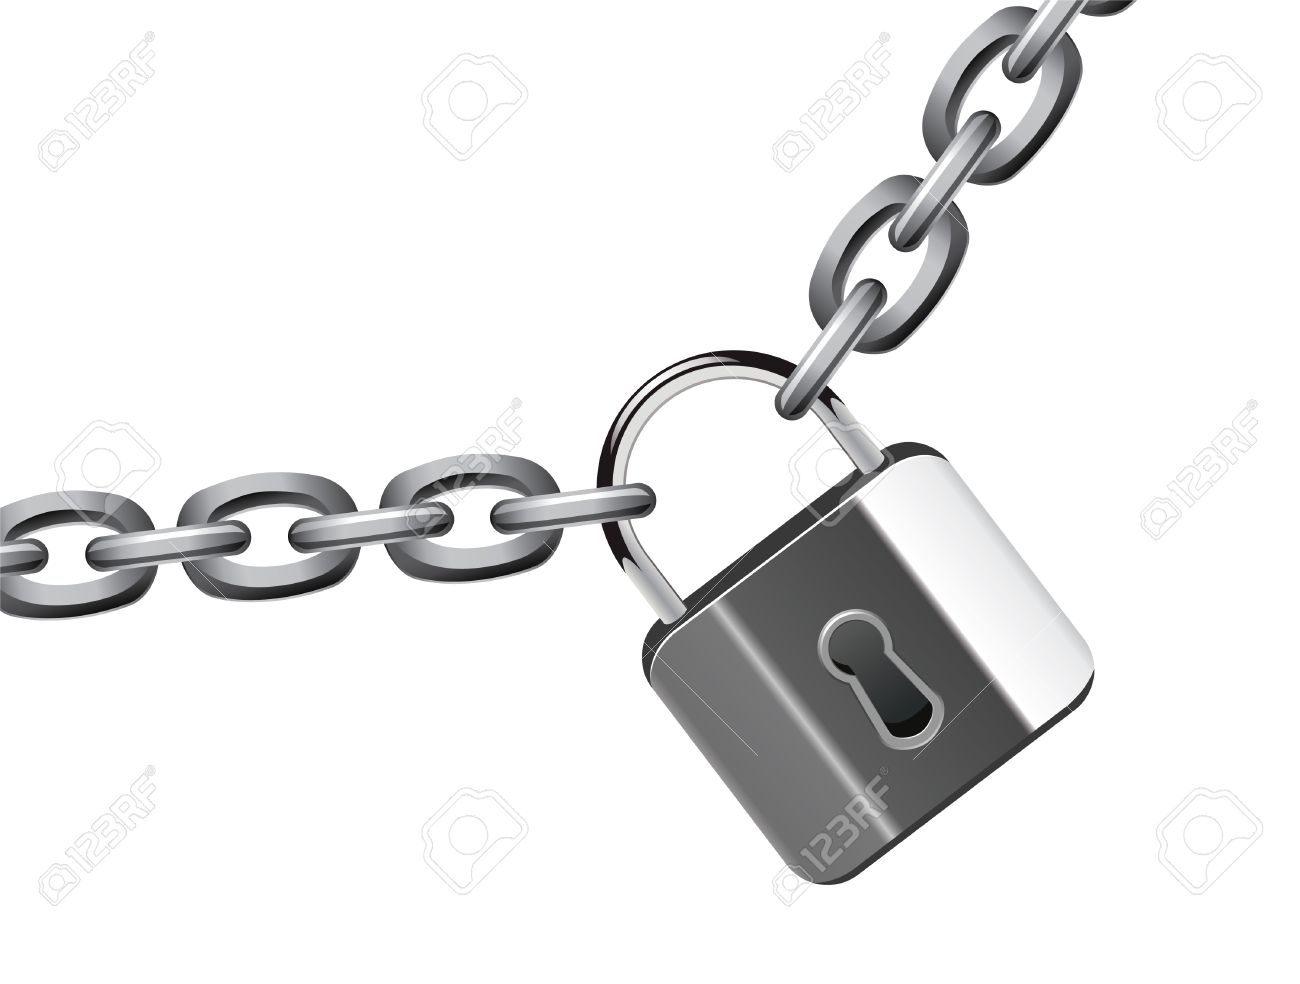 Lock and chain clipart.